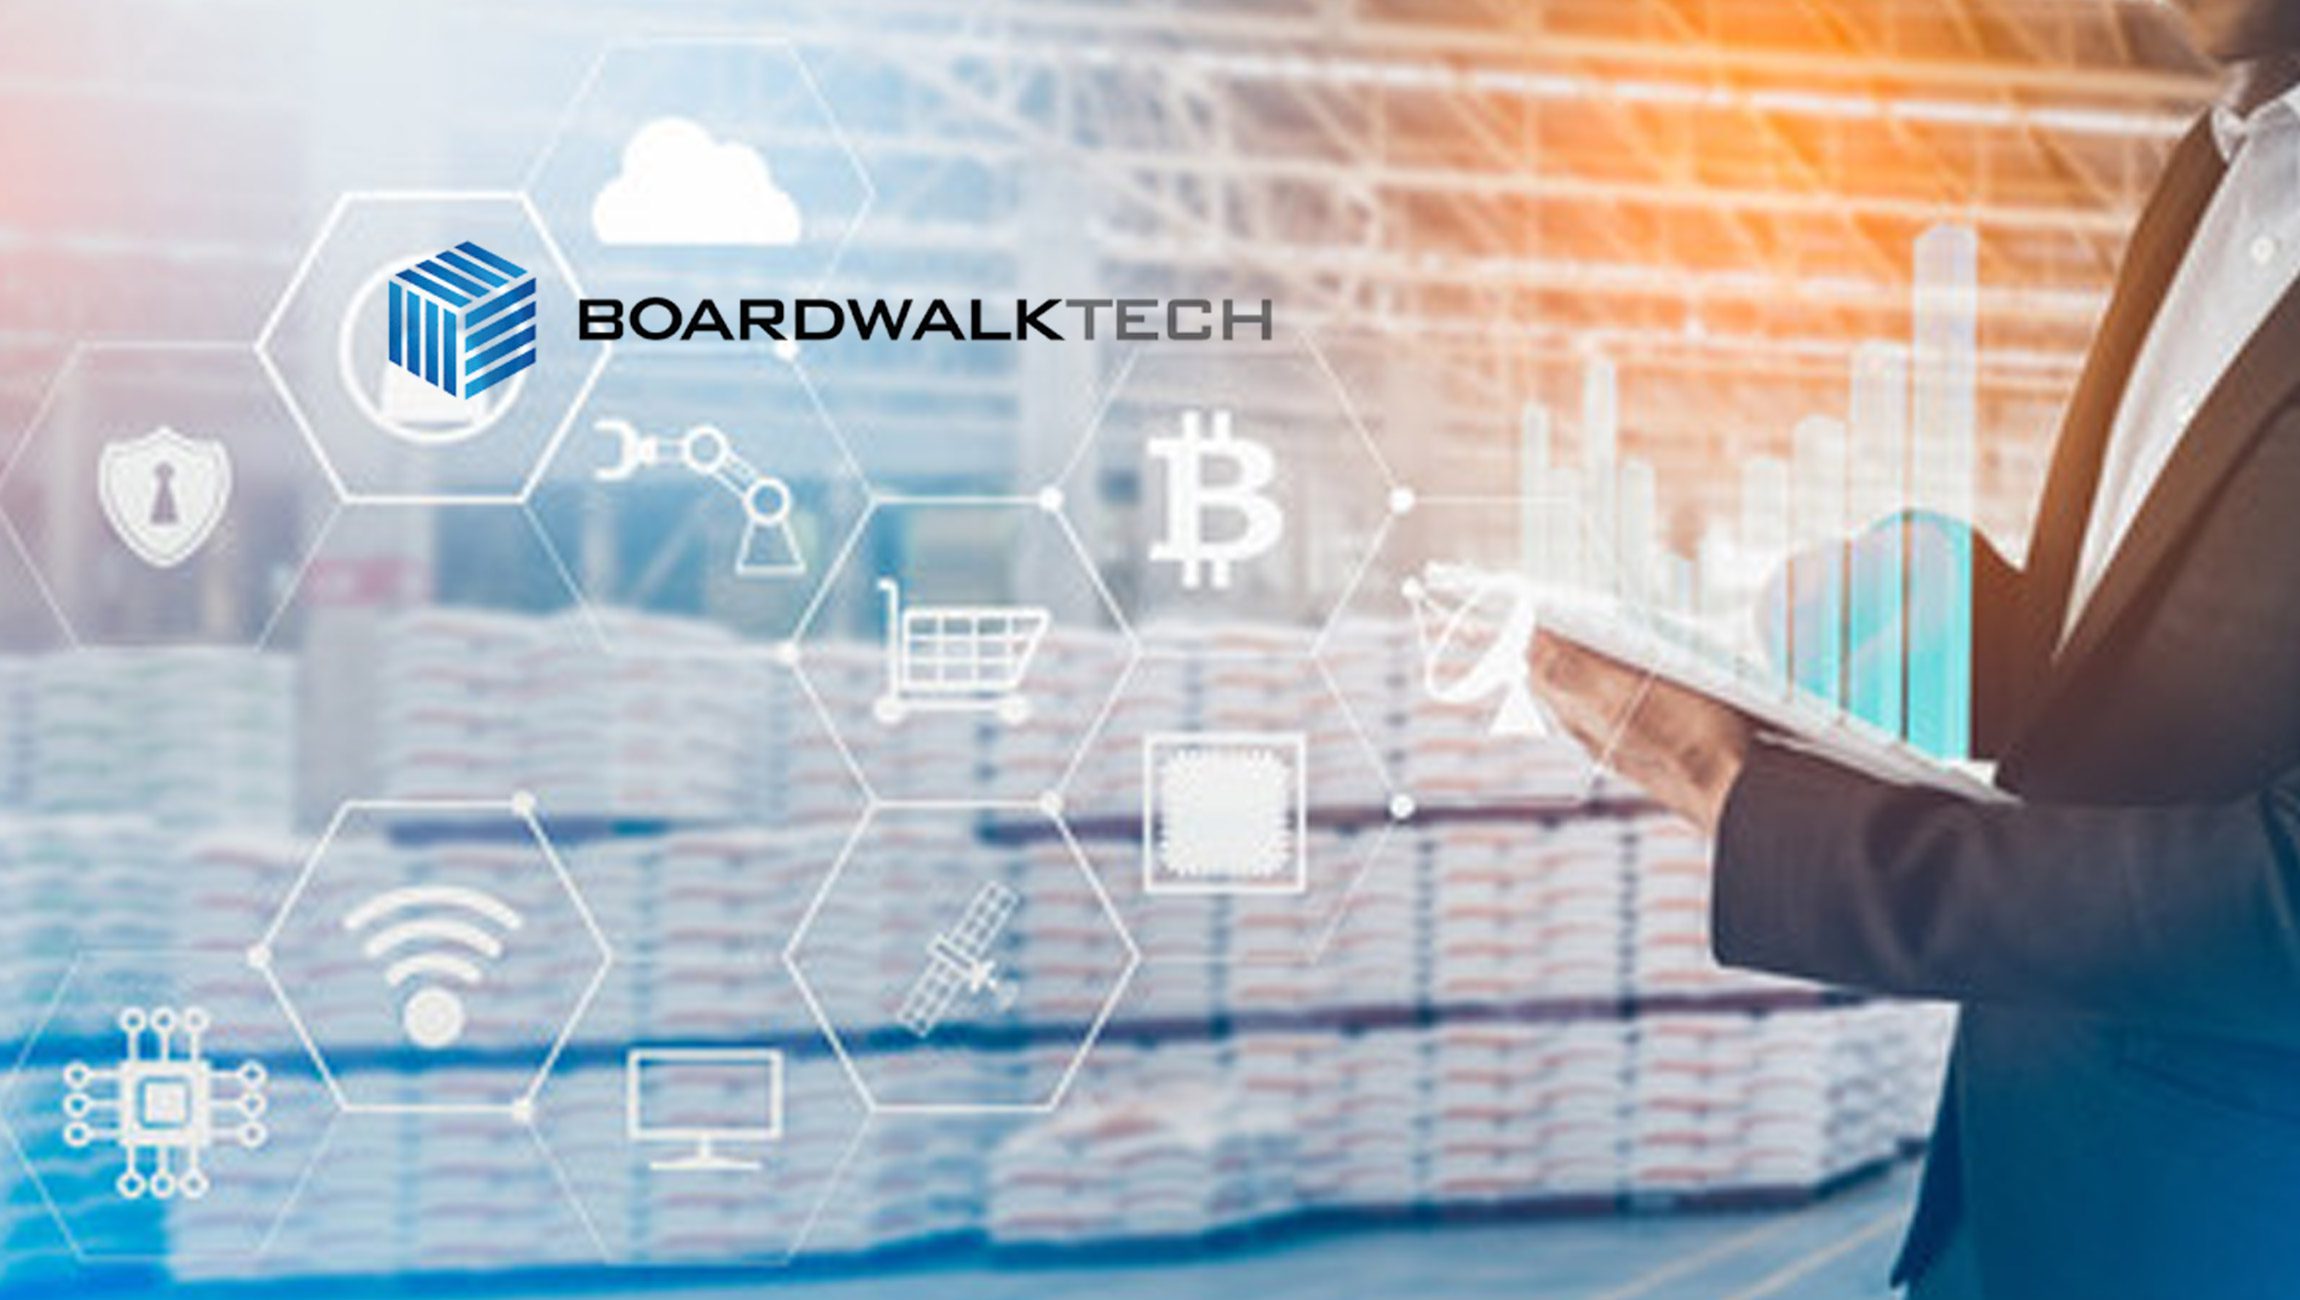 Boardwalktech Extends and Expands Contract With Leading Fortune 50 Company for Data and Supply Chain Visibility